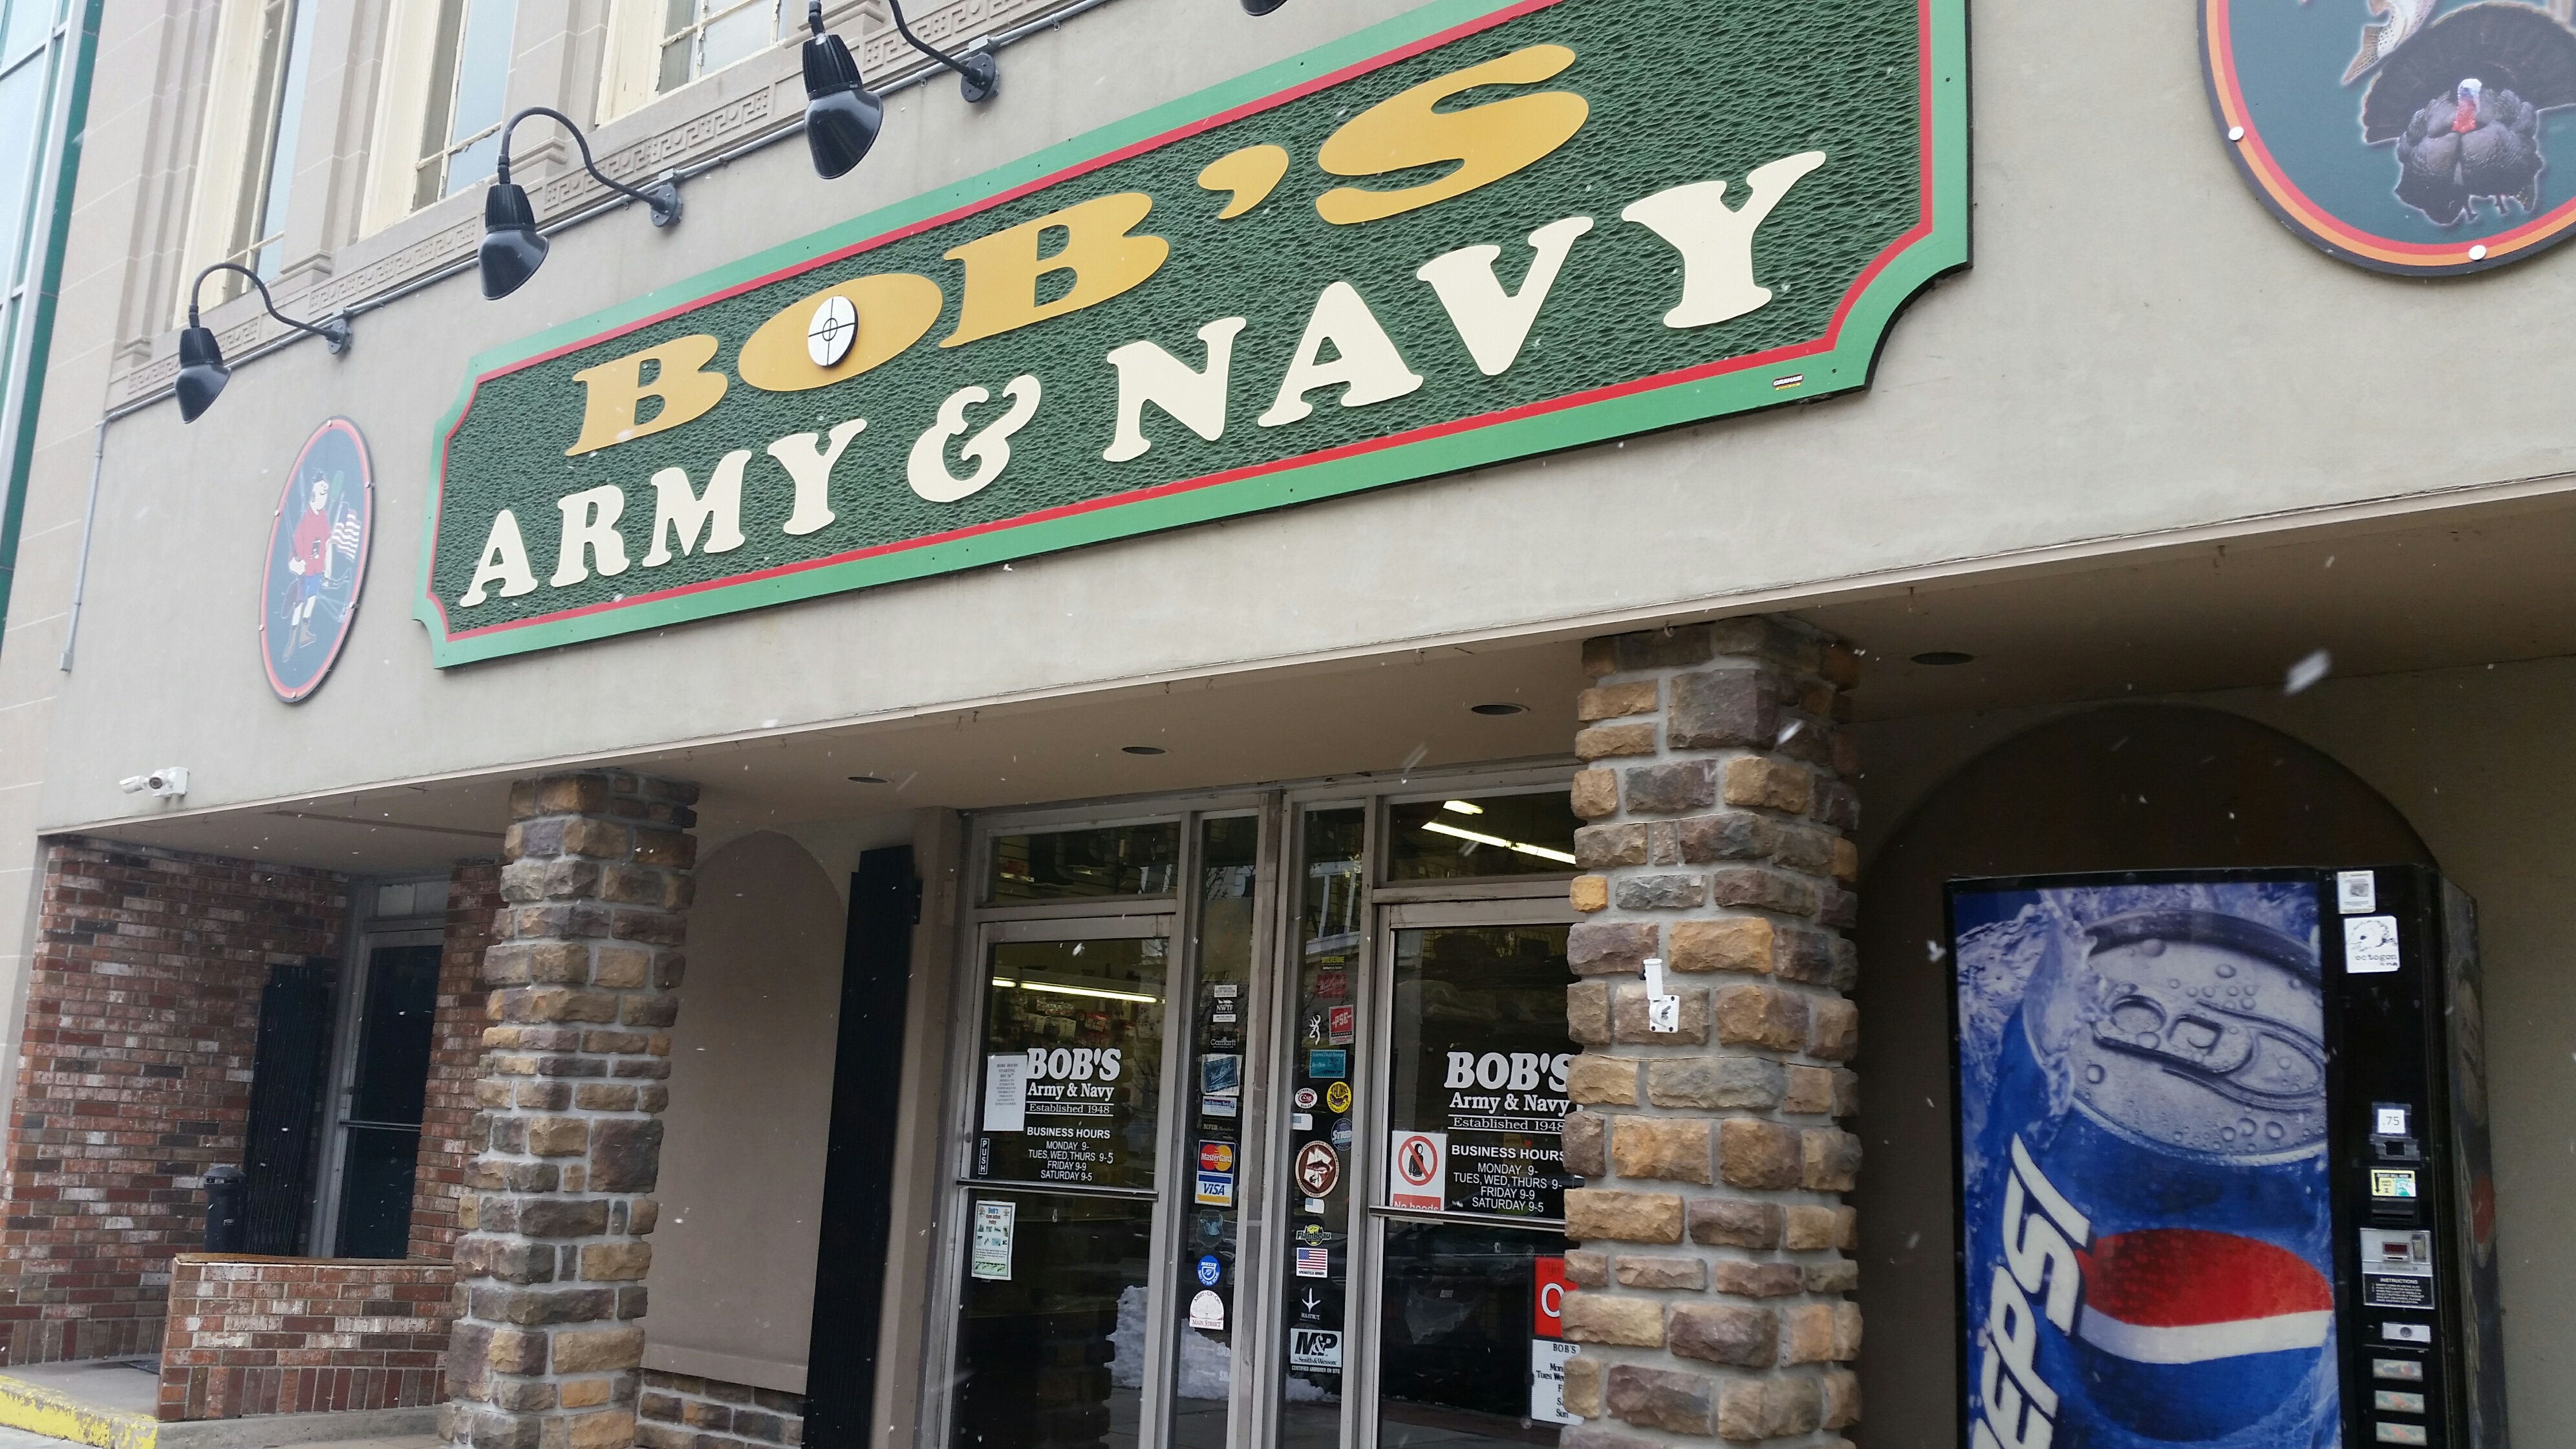 When a young married couple decided to open an army surplus store, they had no idea they were creating a legacy. This year, Bob's Army and Navy in Clearfield will celebrate 70 years in business. The store, started by Robert and Emily Grimminger in 1948 continues to be a family-run business that has become an icon of the downtown Clearfield area. (Photo by Kimberly Finnigan)